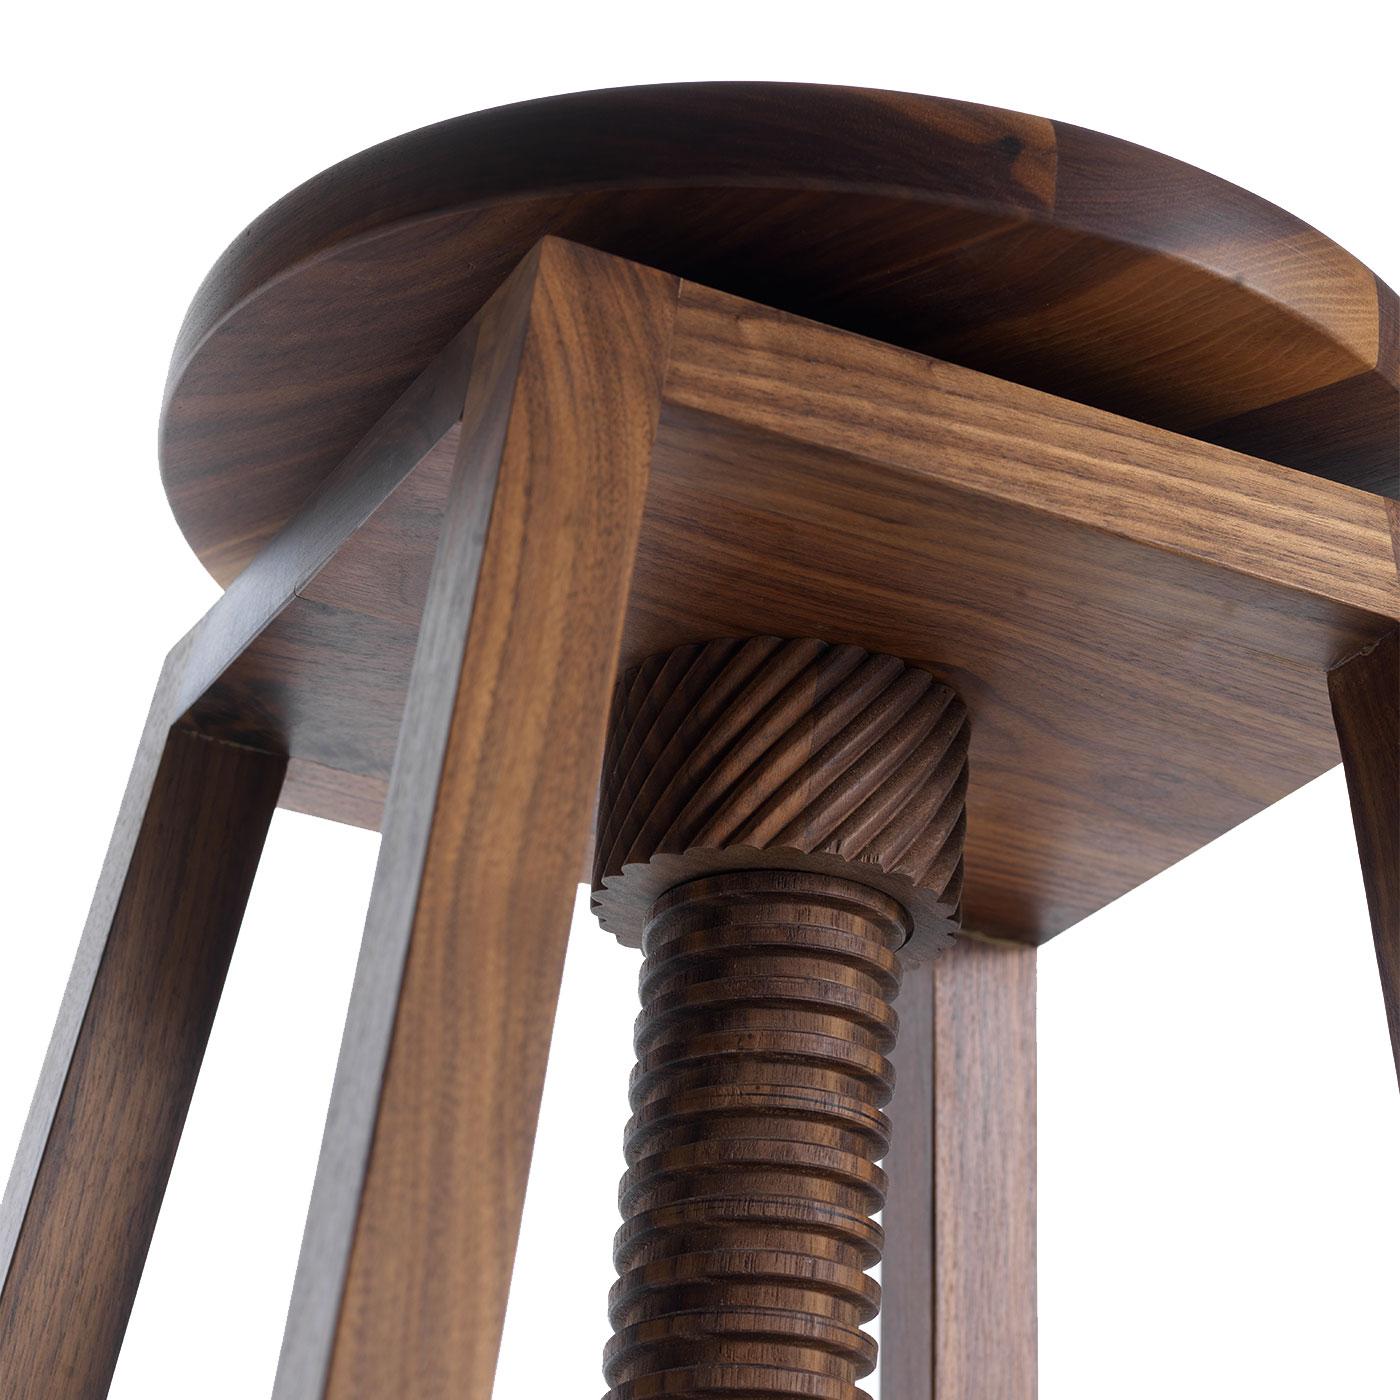 Oiled Invito Solid Wood Stool, Walnut in Hand-Made Natural Finish, Contemporary For Sale